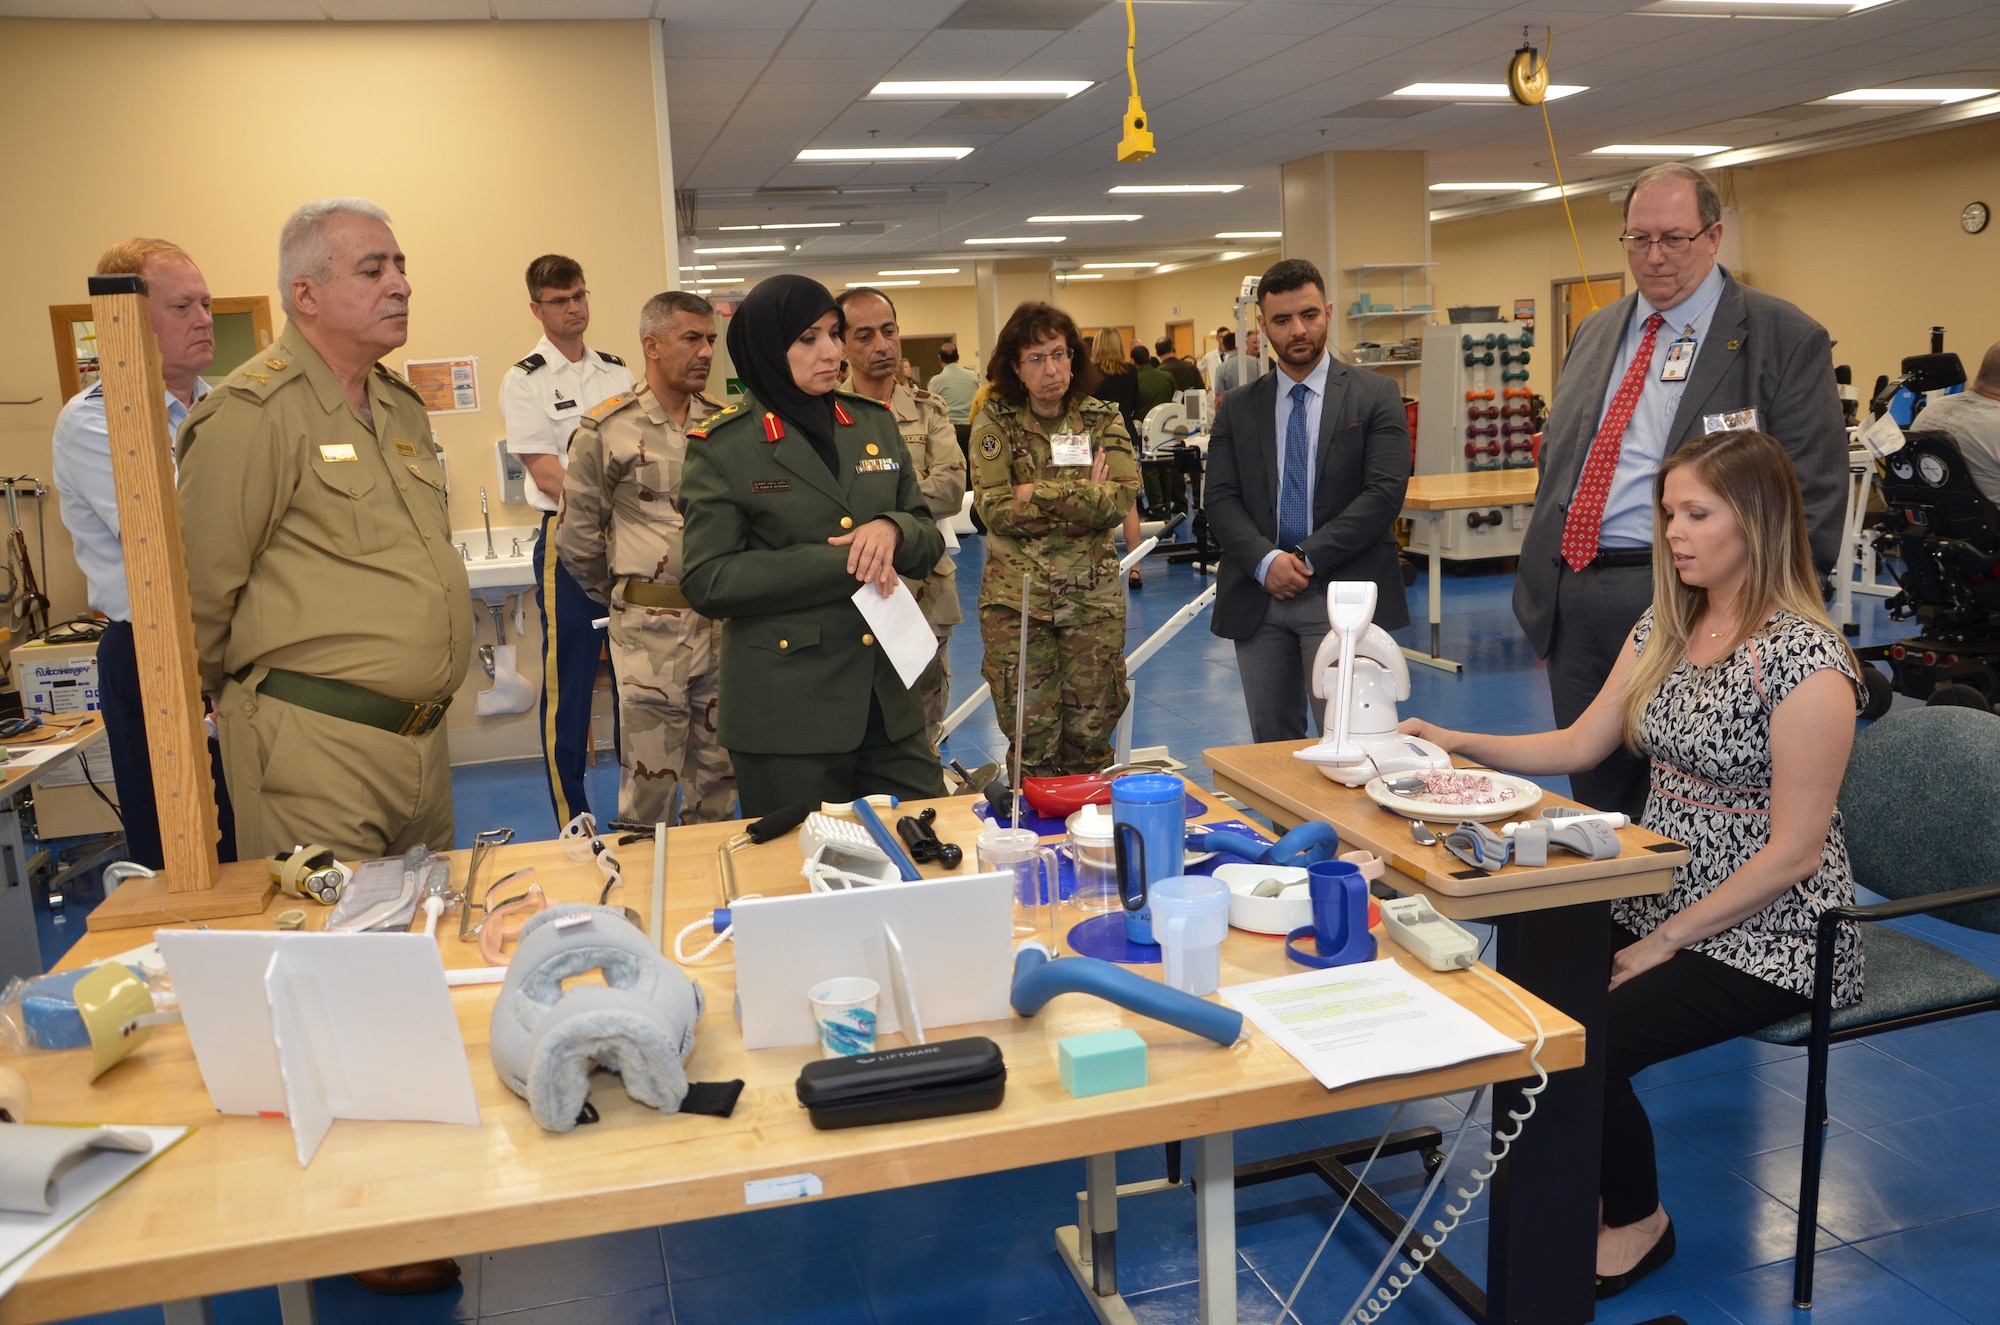 Military medical officials representing eighteen coalition and partner nations view a prosthetic component display during a tour of the James A. Haley Veteran’s Hospital during USCENTCOM’s Medical Security Cooperation Exchange, April 4, 2019. The biennial event provides a forum to exchange information intended to enhance medical capabilities in support of missions that include disaster response, humanitarian assistance, and combat and peacekeeping operations. (Courtesy Photo by Ed Drohan)